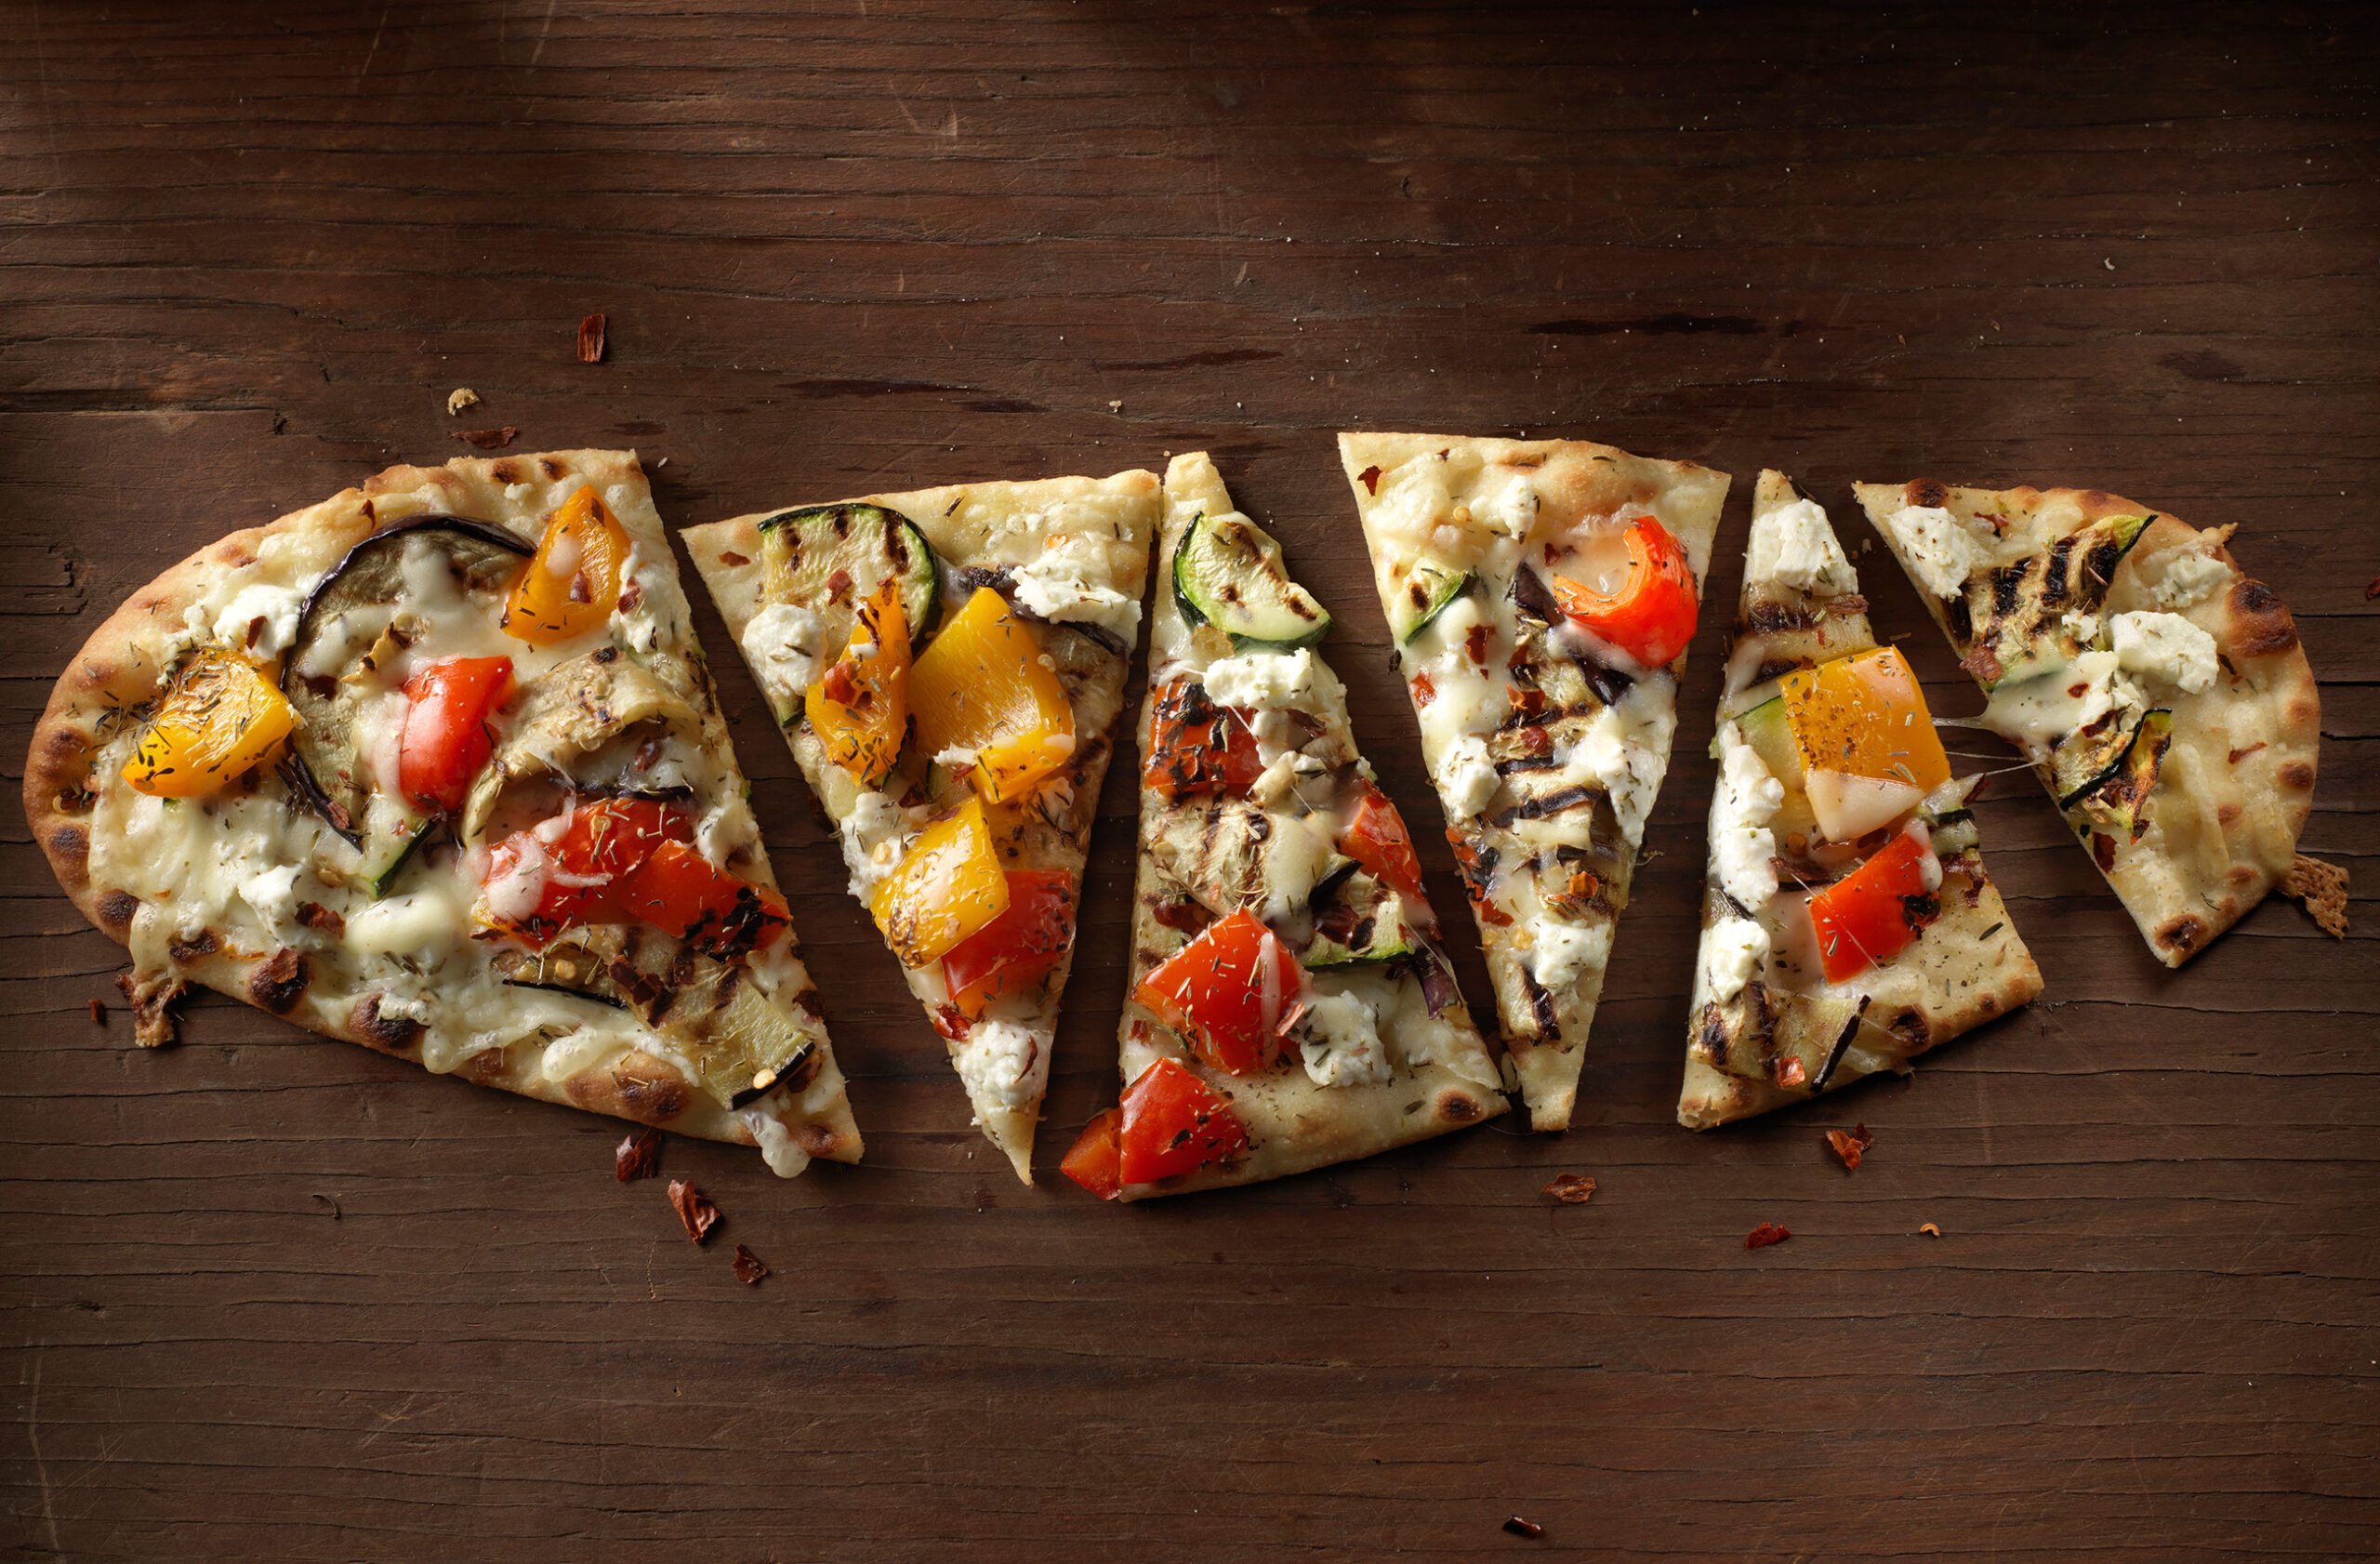 Stonefire Flatbread with grilled veggies. Set in a dark wooden background